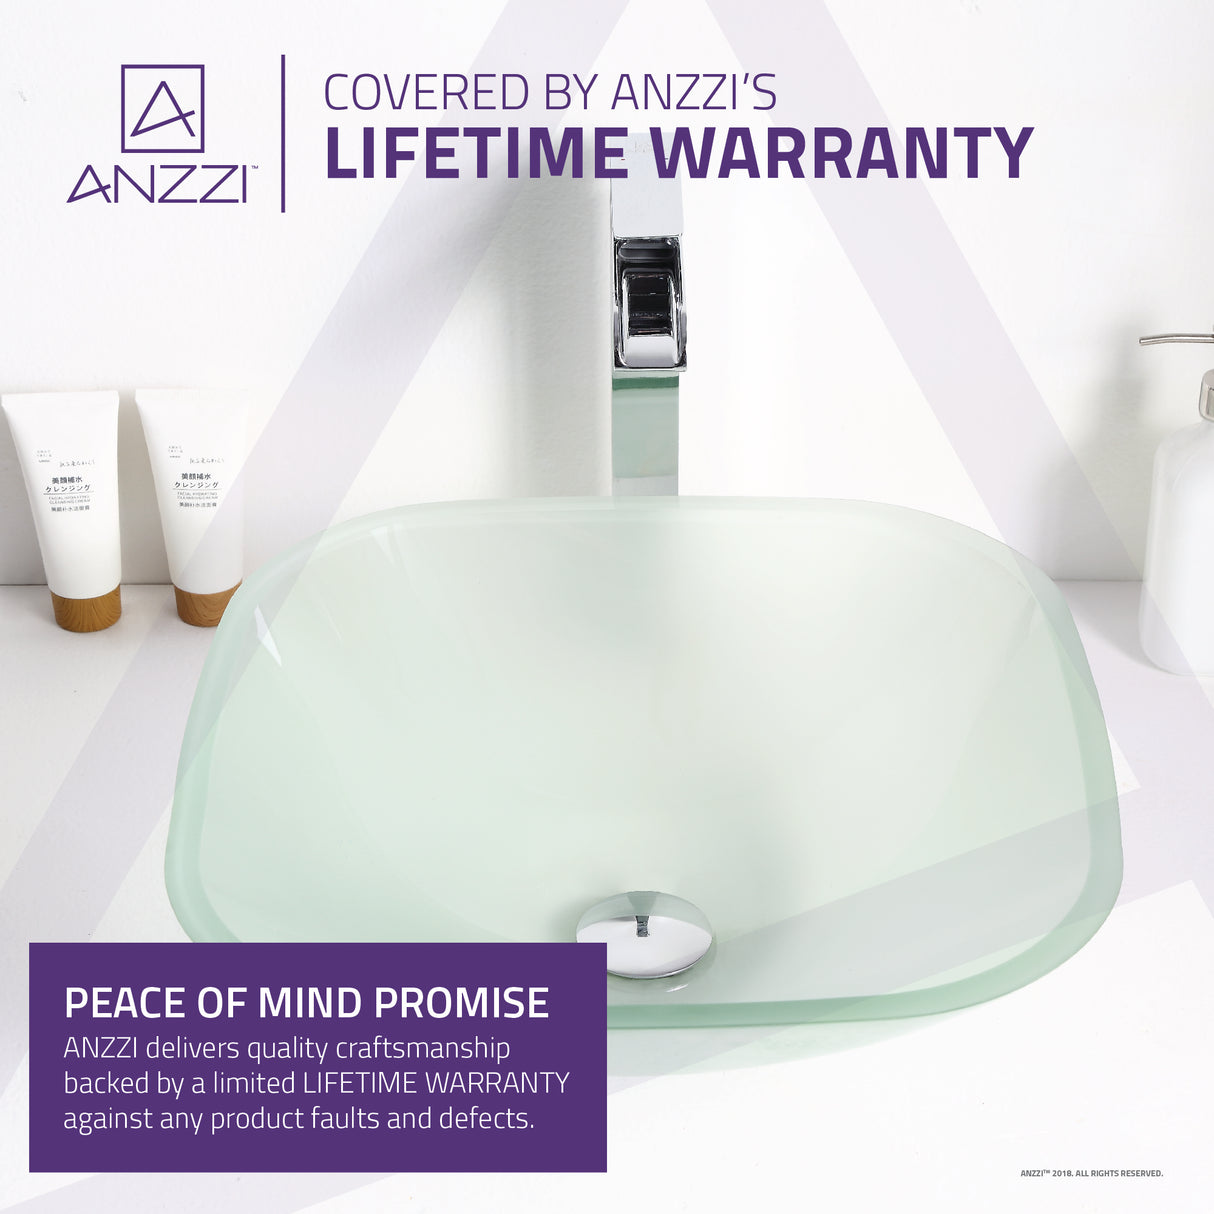 ANZZI LS-AZ081 Vista Series Deco-Glass Vessel Sink in Lustrous Frosted Finish